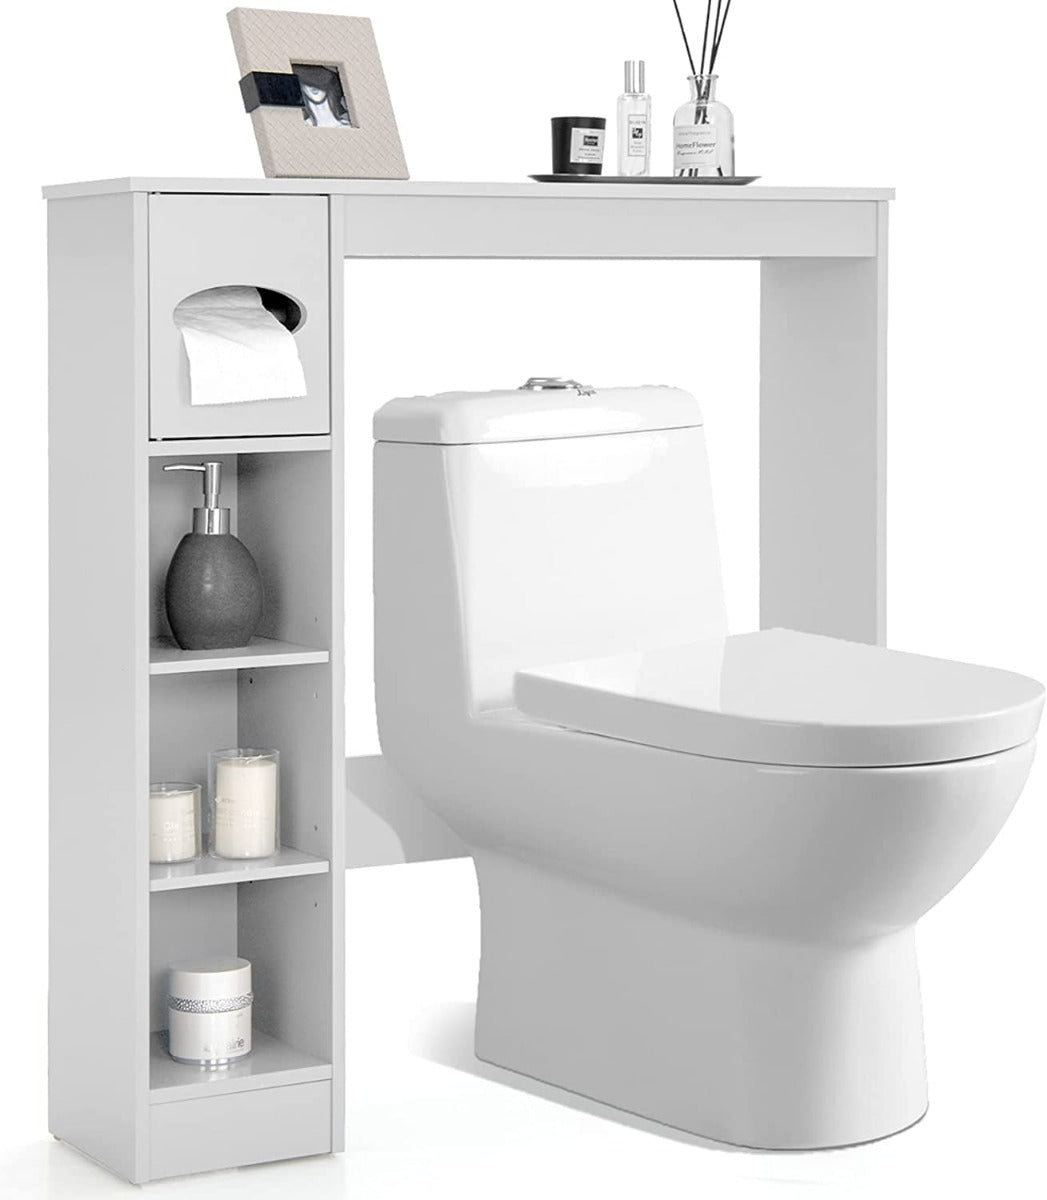 Freestanding Bathroom Space Saver with Toilet Paper Holder White